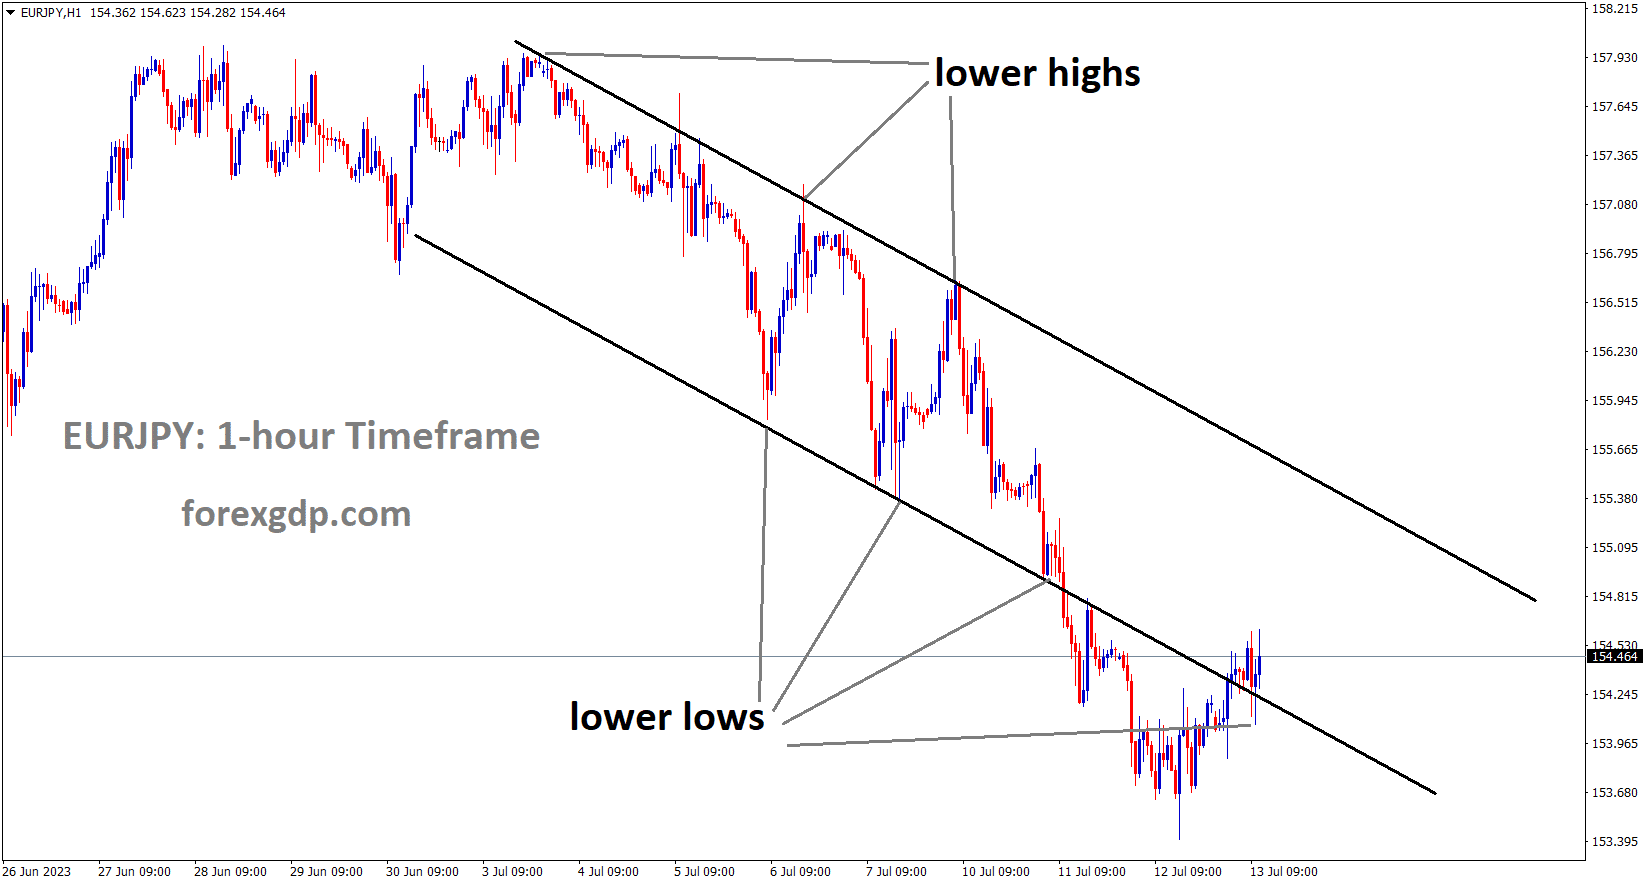 EURJPY is moving in the Descending channel and the market has rebounded from the lower low area of the channel 1